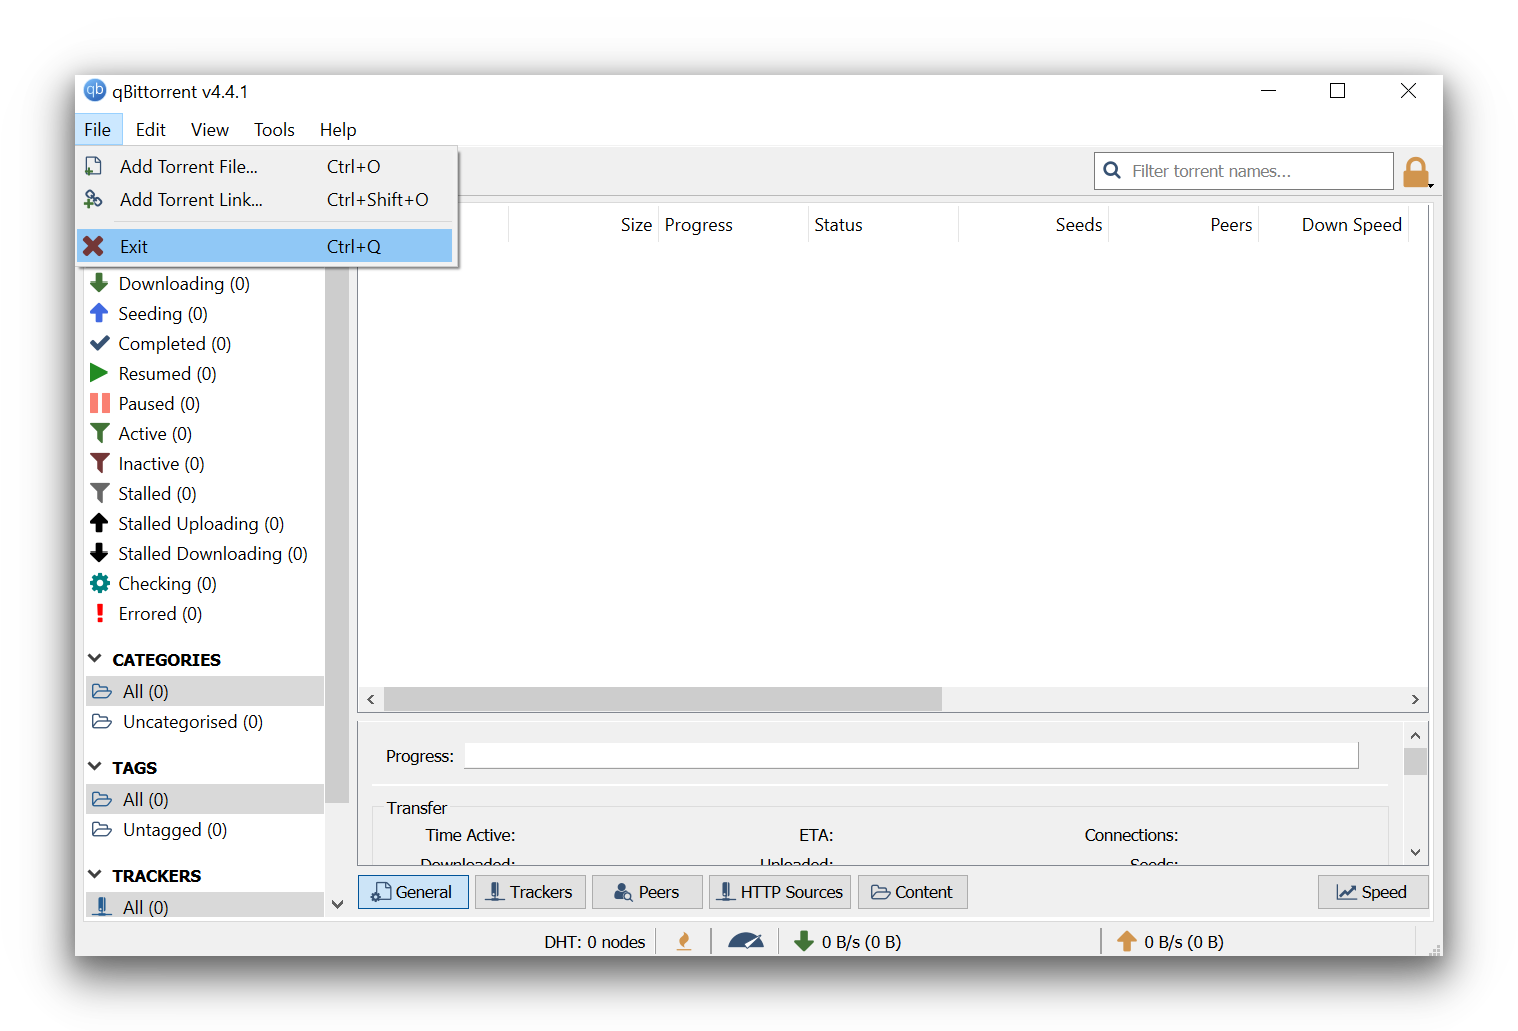 How to close down qBittorrent correctly